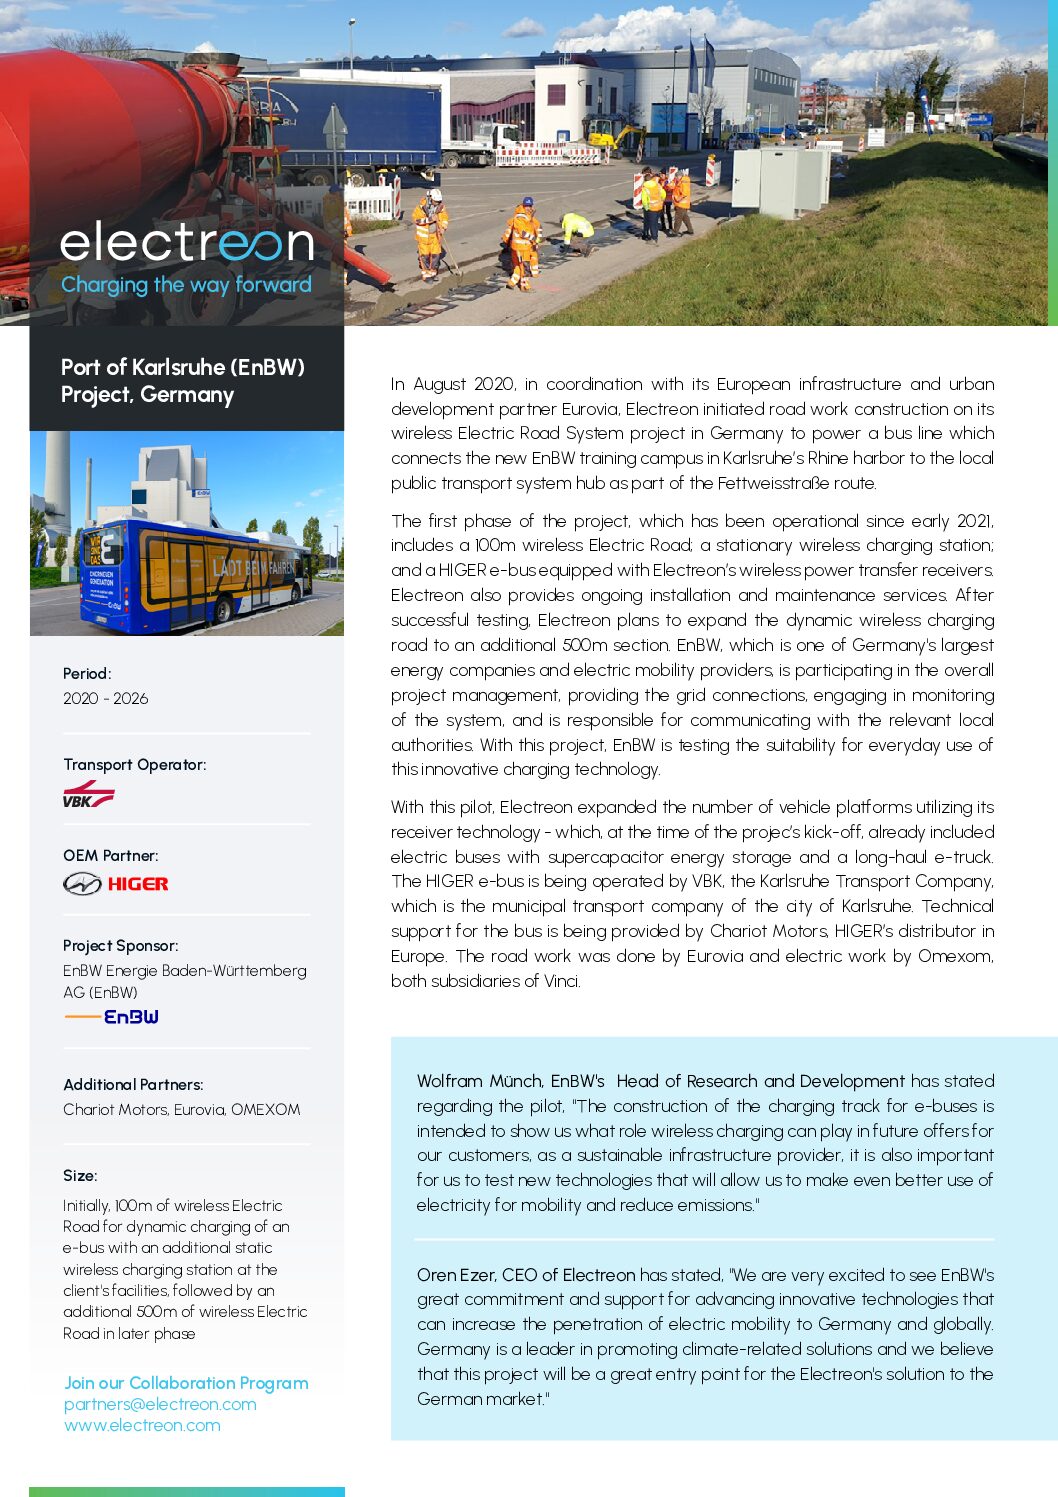 Electreon: Port of Karlsruhe (EnBW) Project, Germany